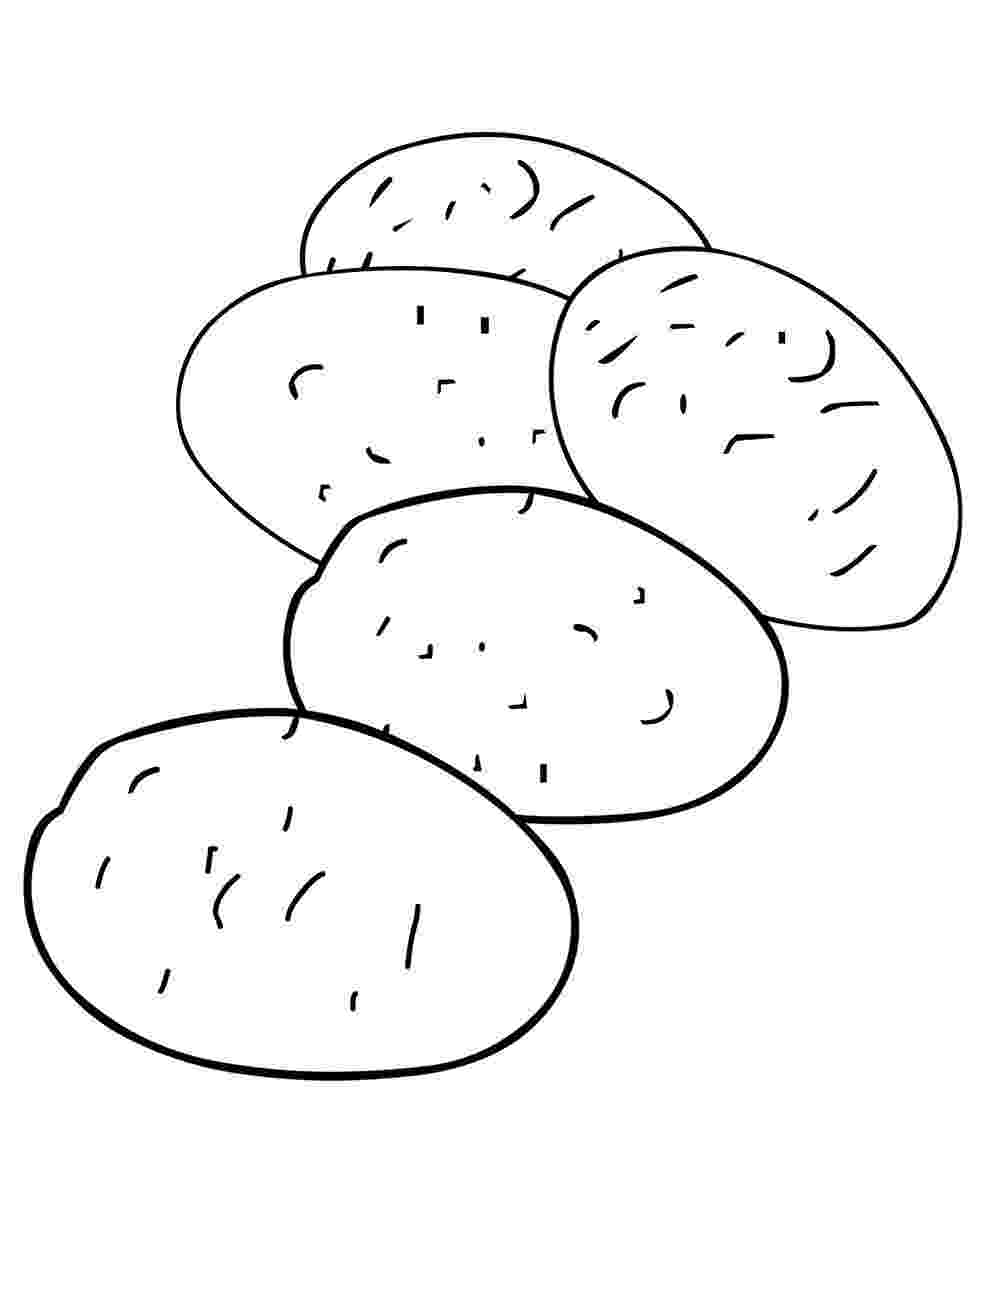 potato pictures for colouring vegetables potatoes vegetable coloring pages vegetable potato pictures colouring for 